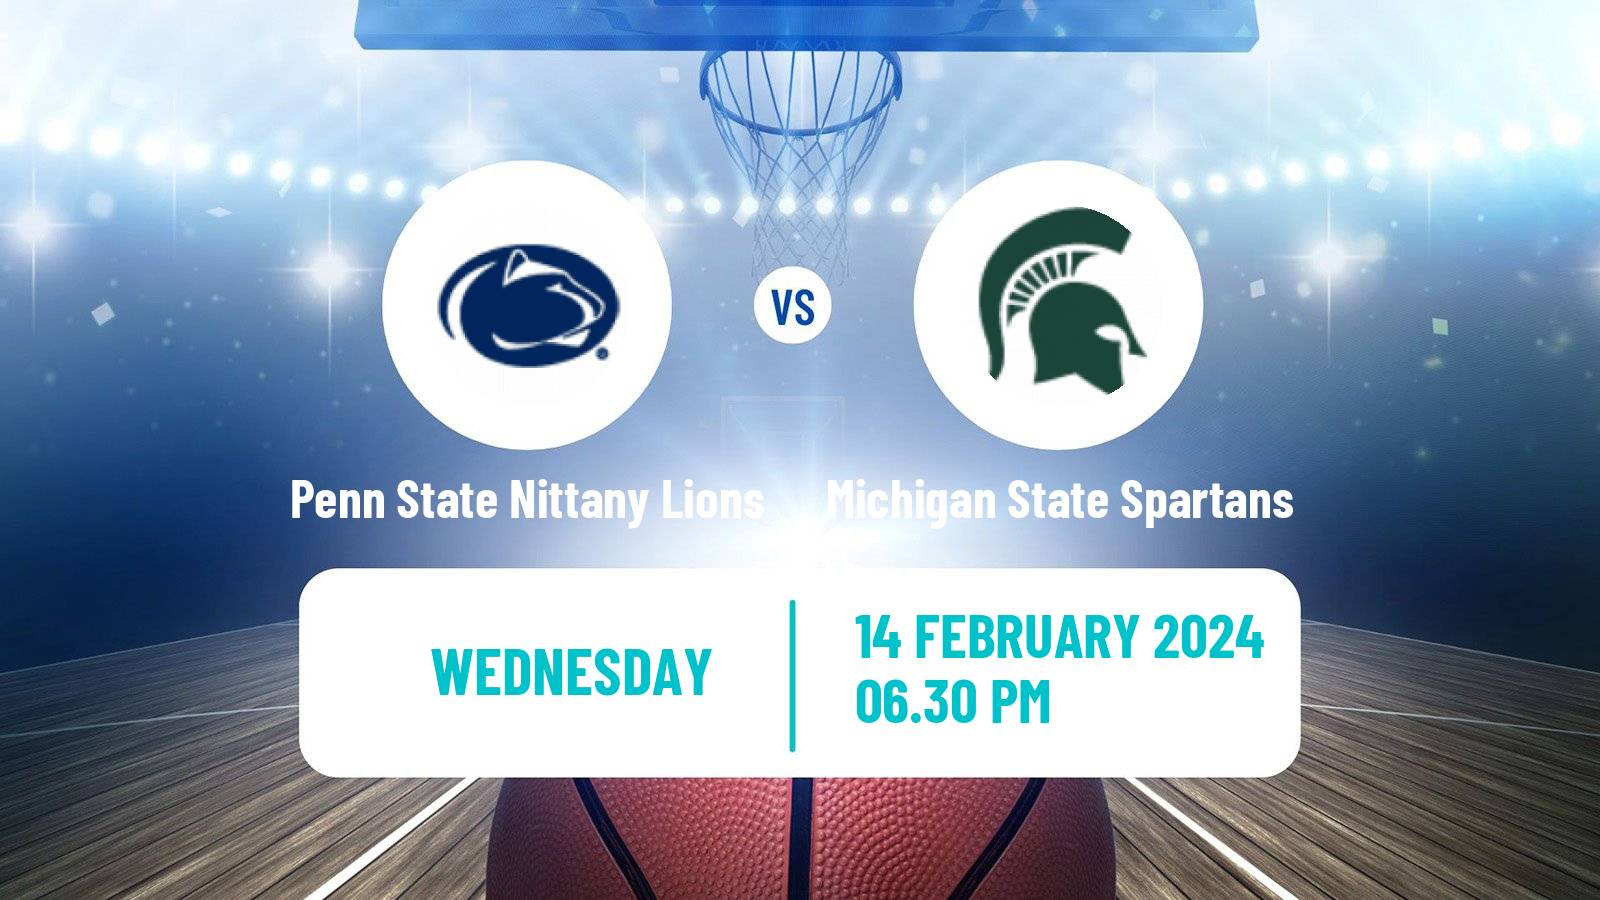 Basketball NCAA College Basketball Penn State Nittany Lions - Michigan State Spartans